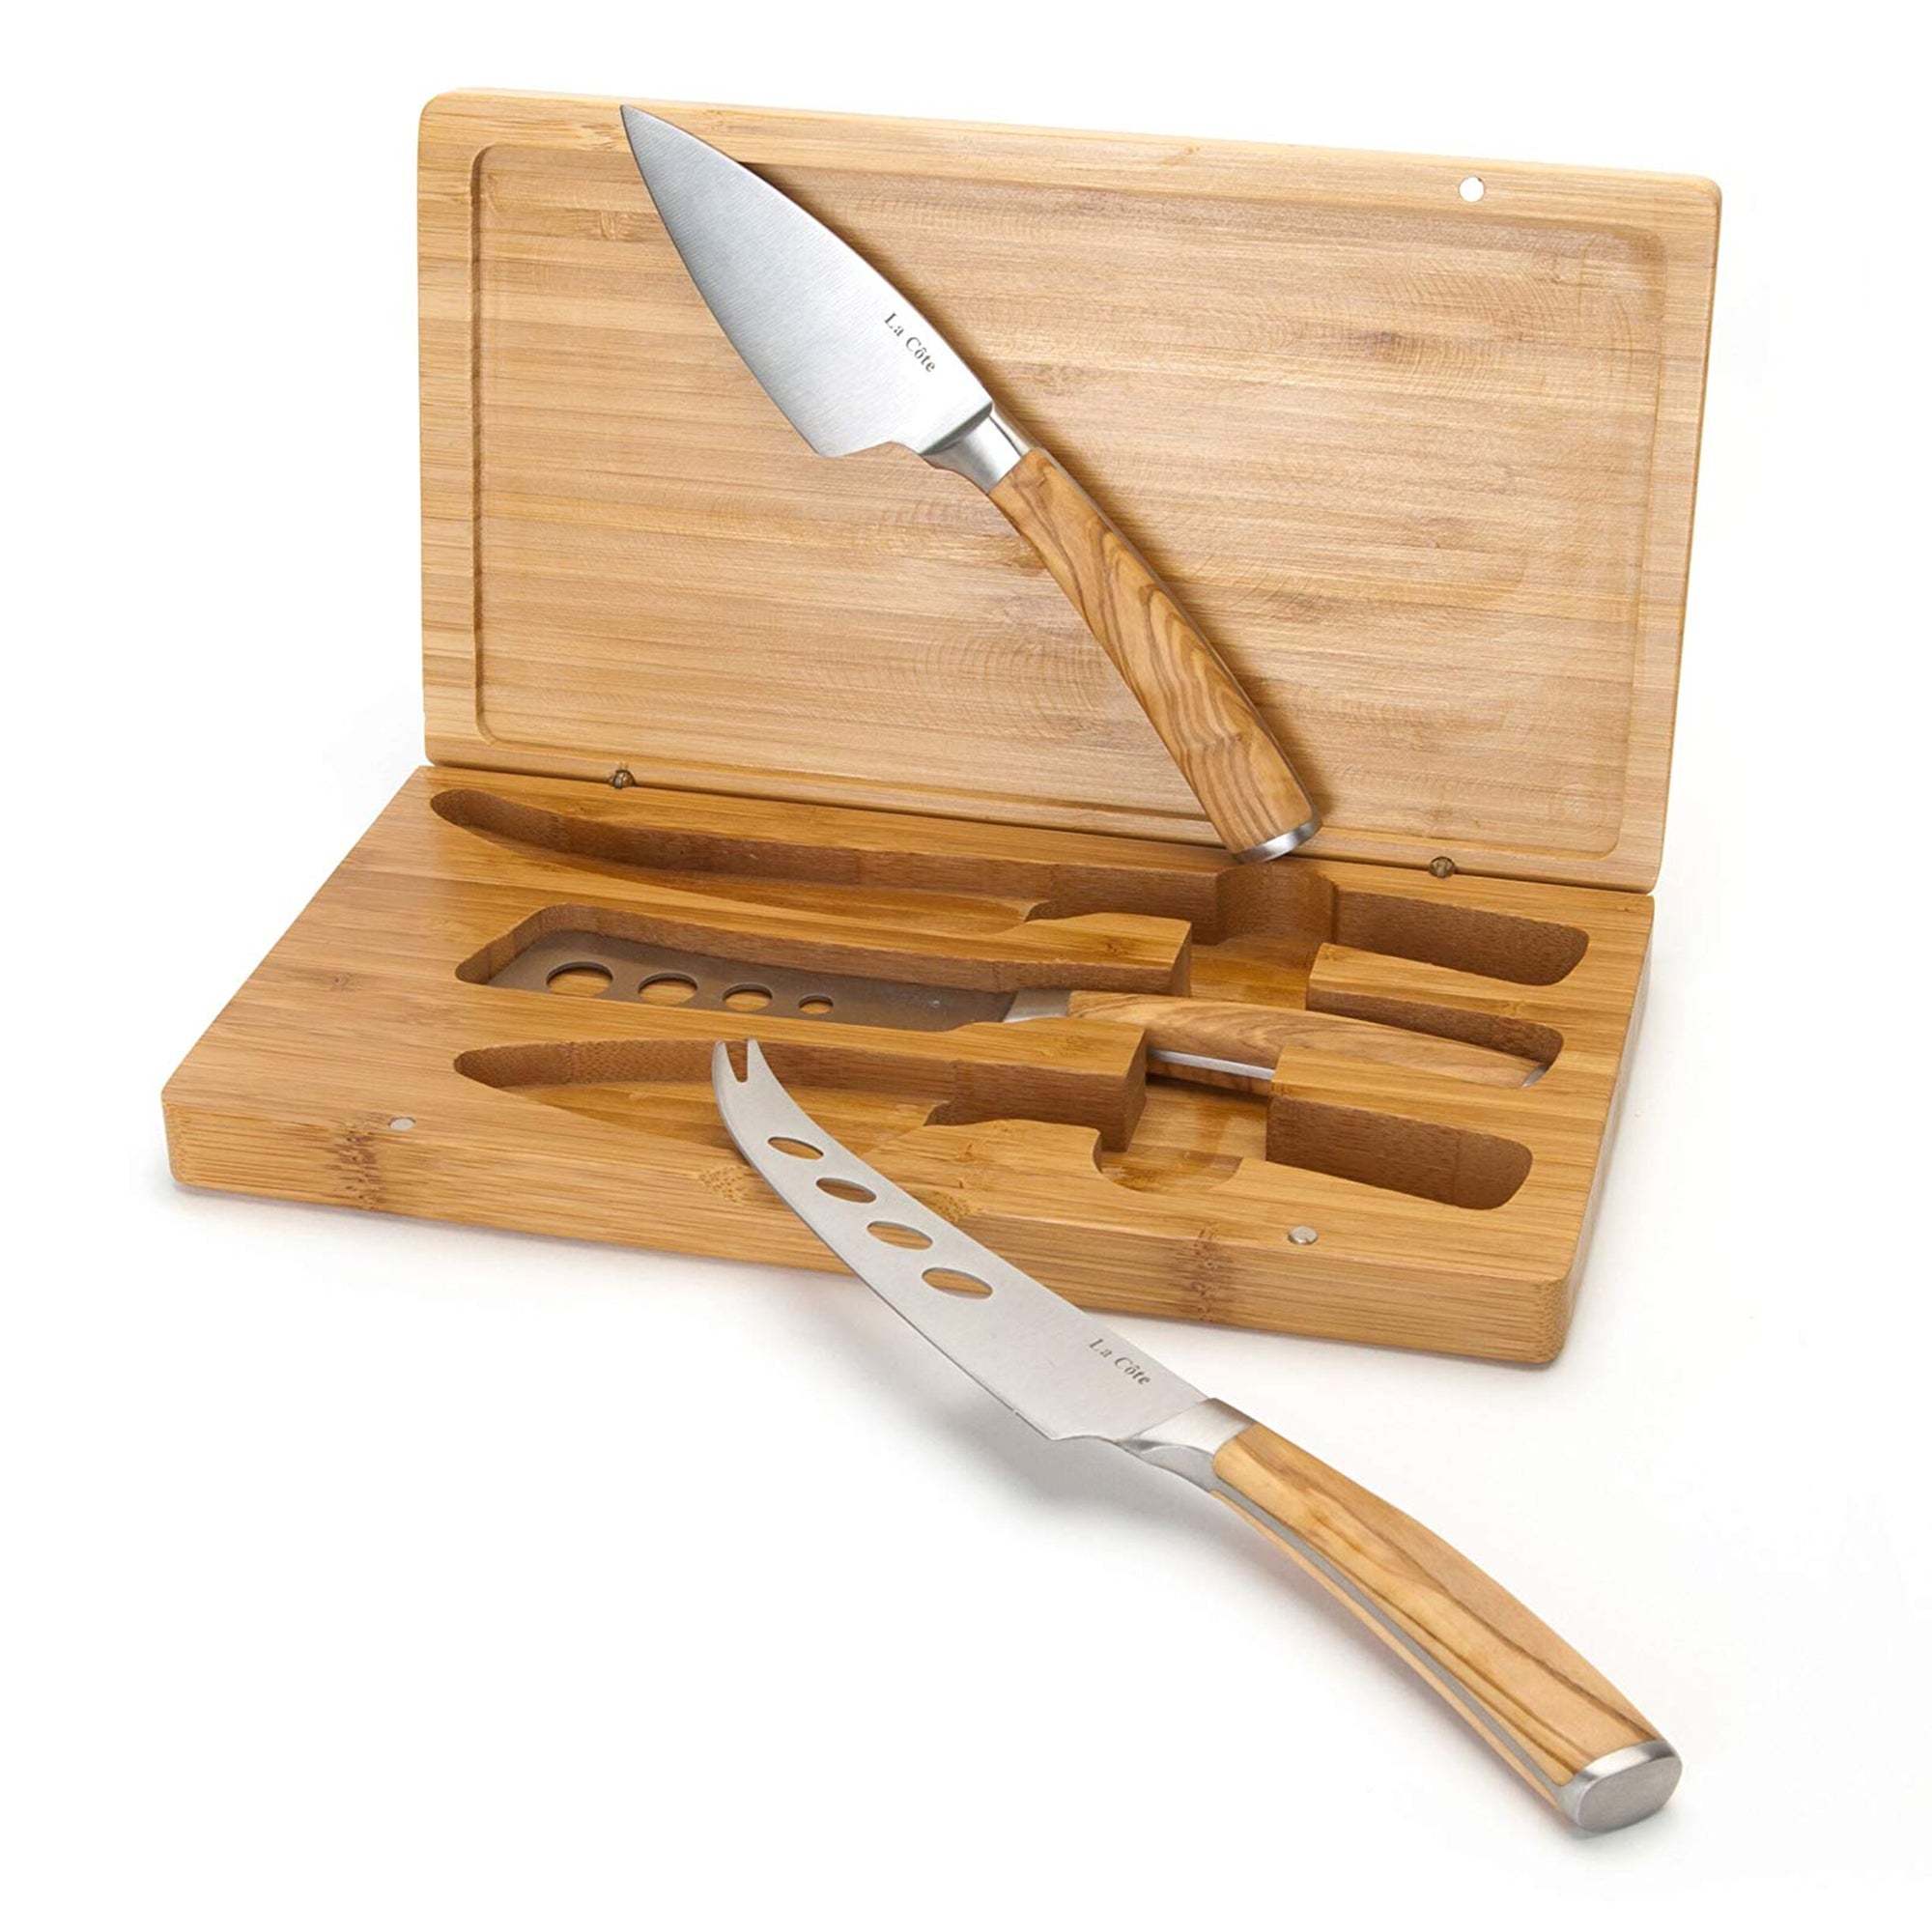 La Cote Olive Wood Cheese Knives Set Servers Accessories (3 Piece Cheese Knife Set In Bamboo box)